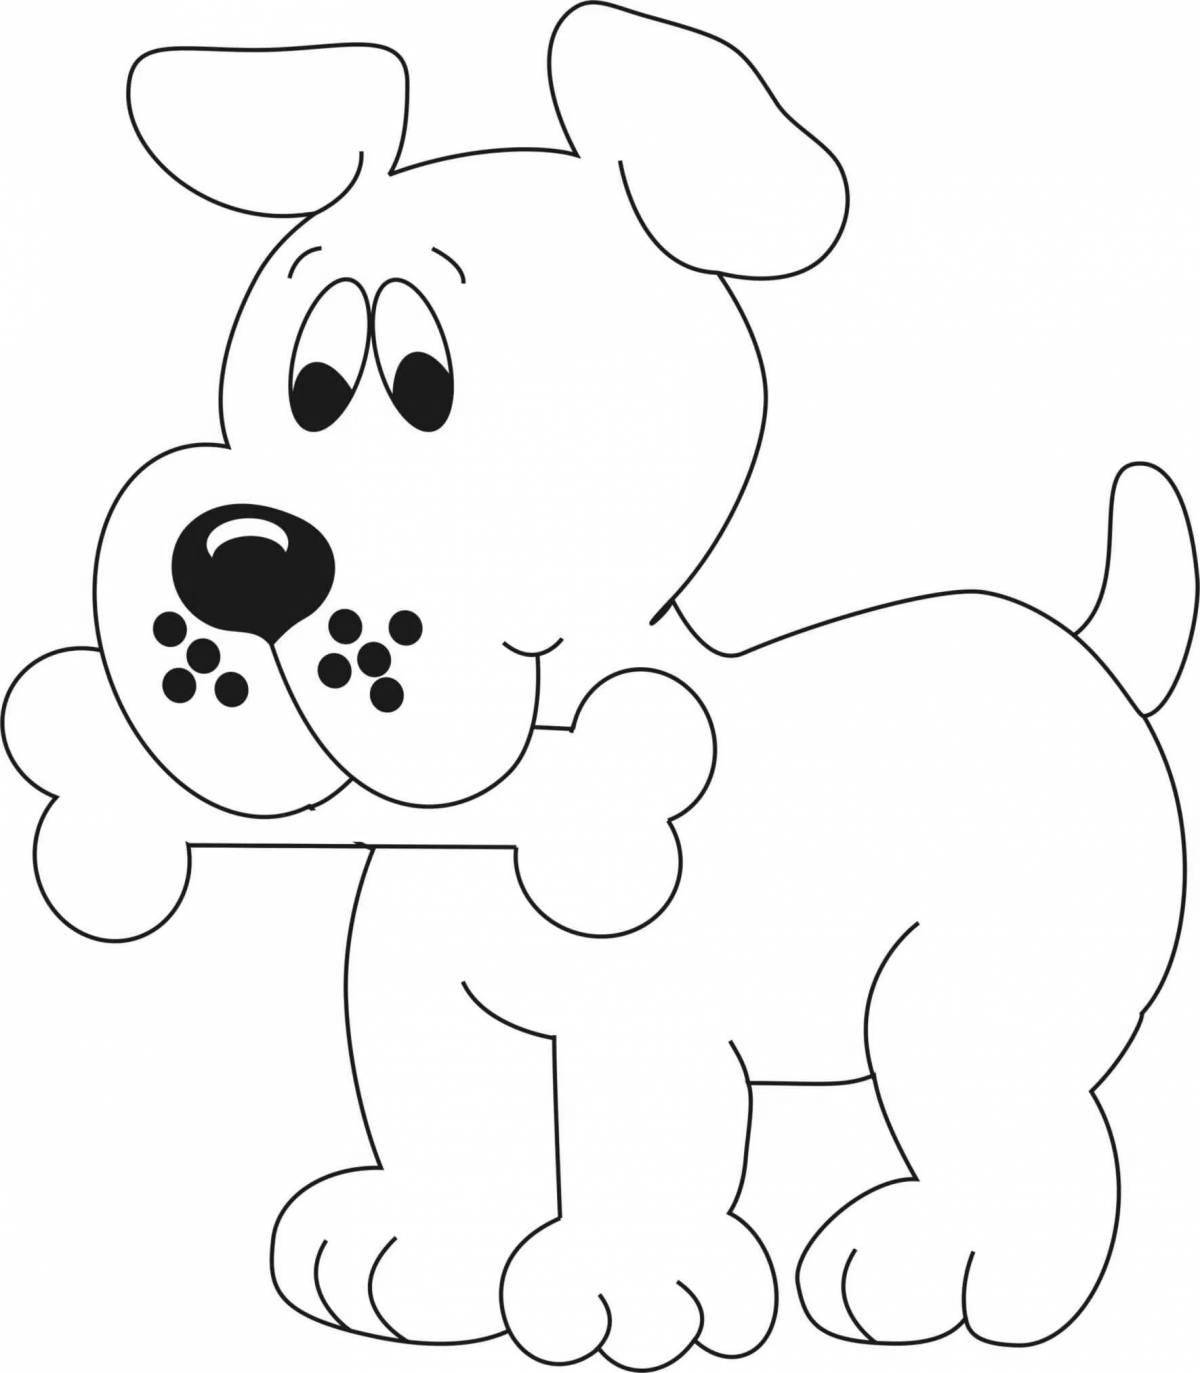 Tempting coloring picture of a dog